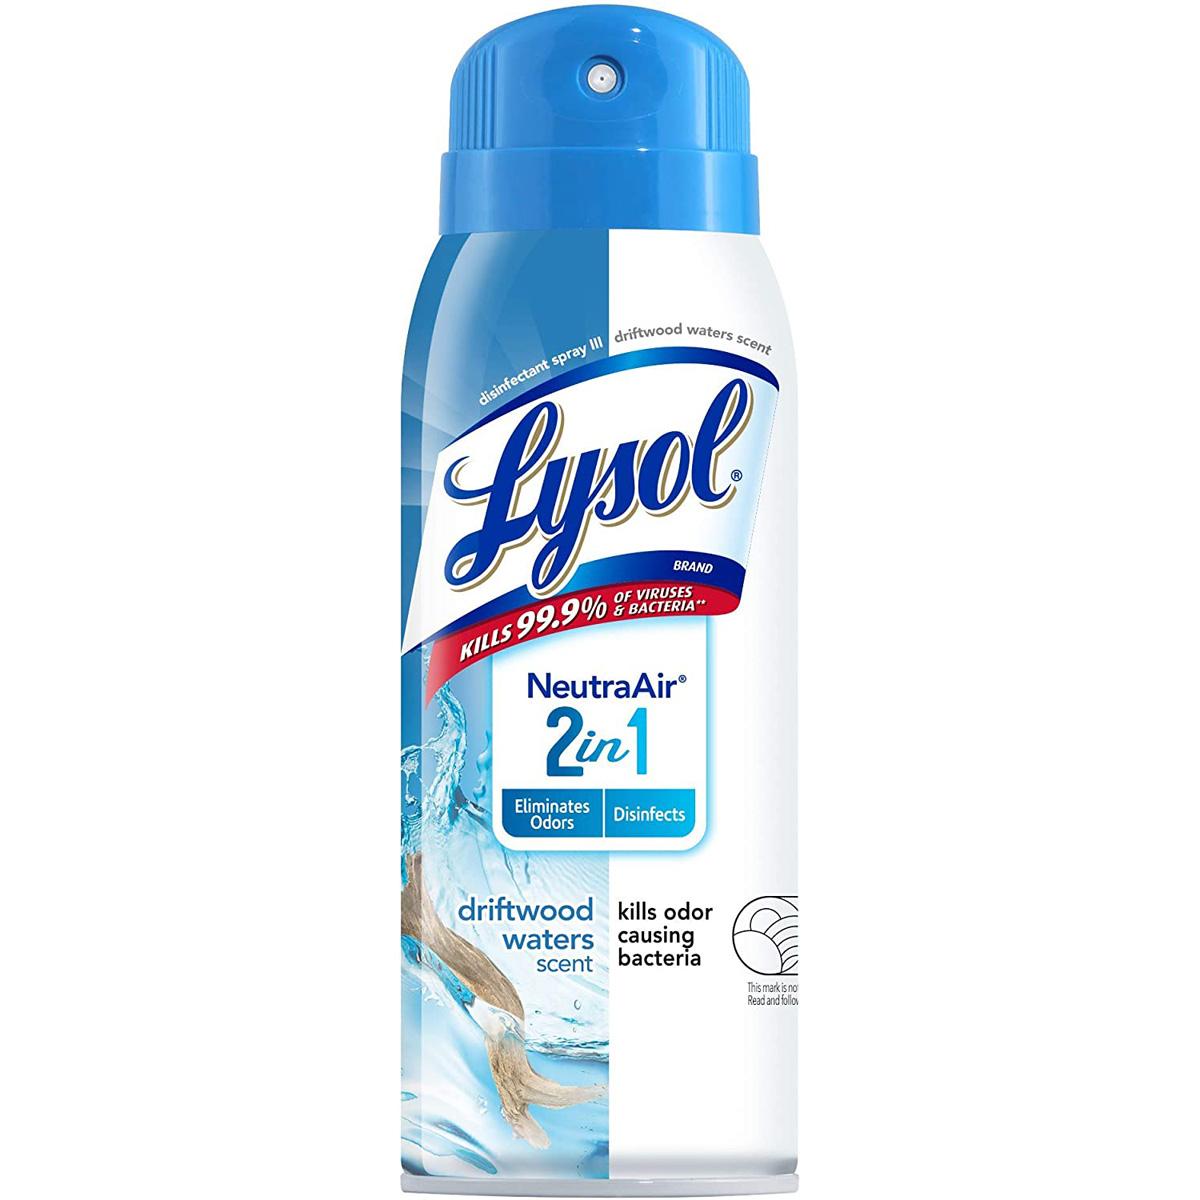 Lysol NeutraAir 2-in-1 Eliminates Odors and Disinfects Spray for $2.59 Shipped